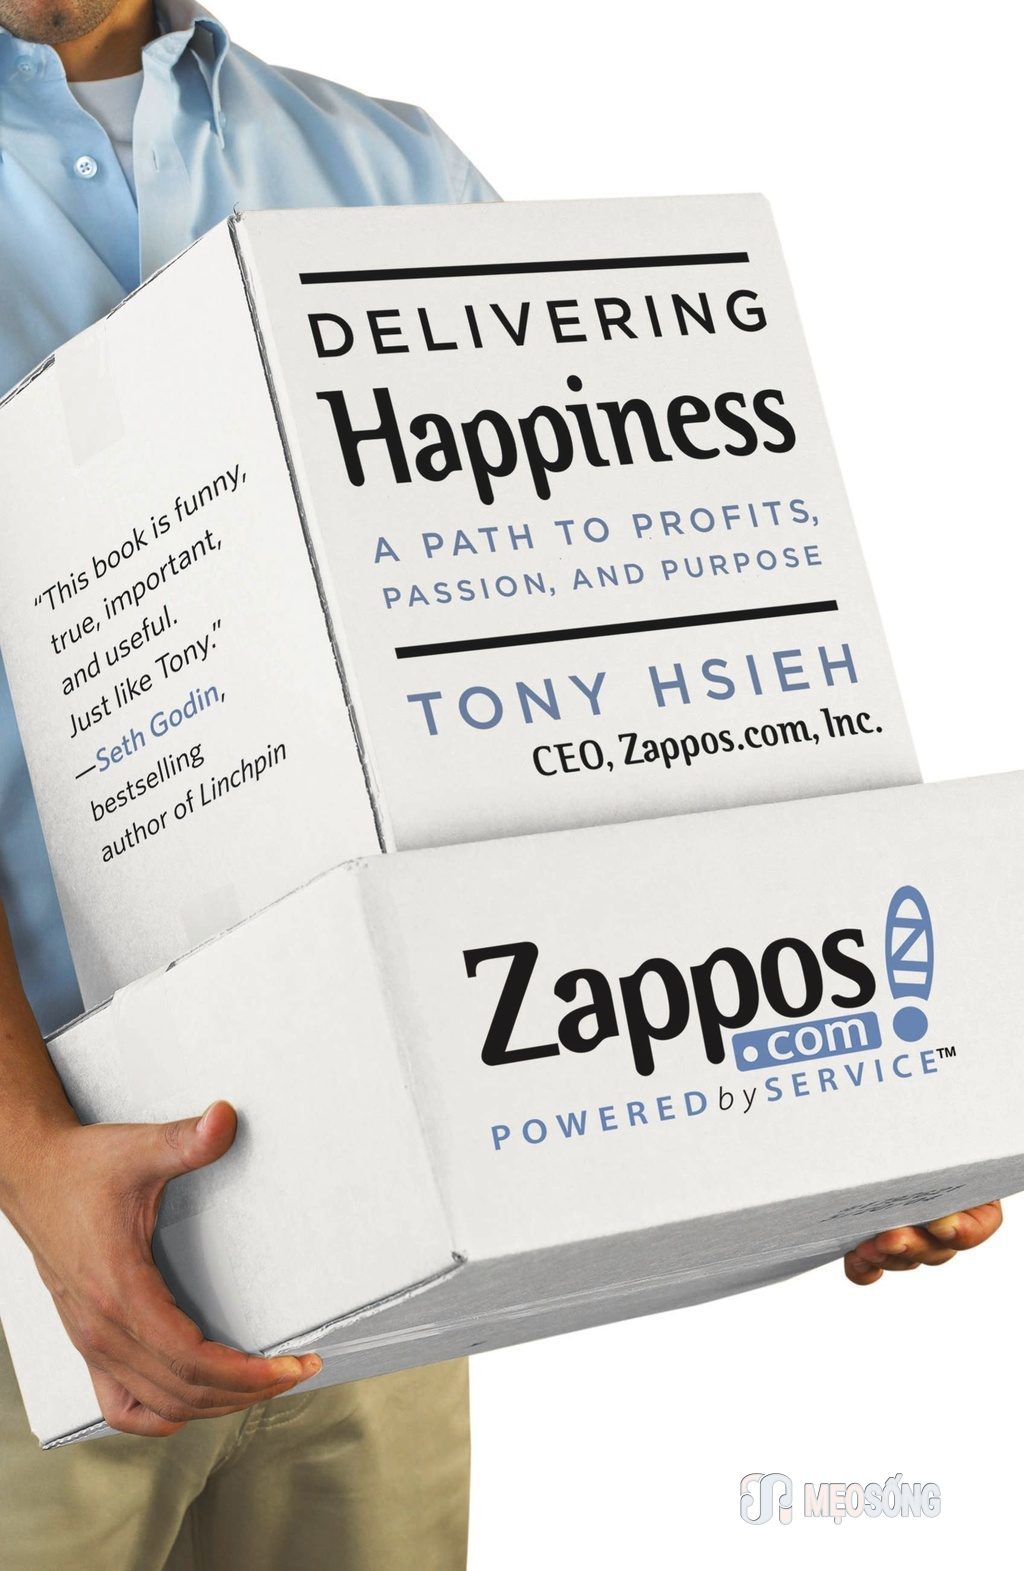 Delivery Happiness: A Path to Profits, Passions, and Purpose by Tony Hsieh